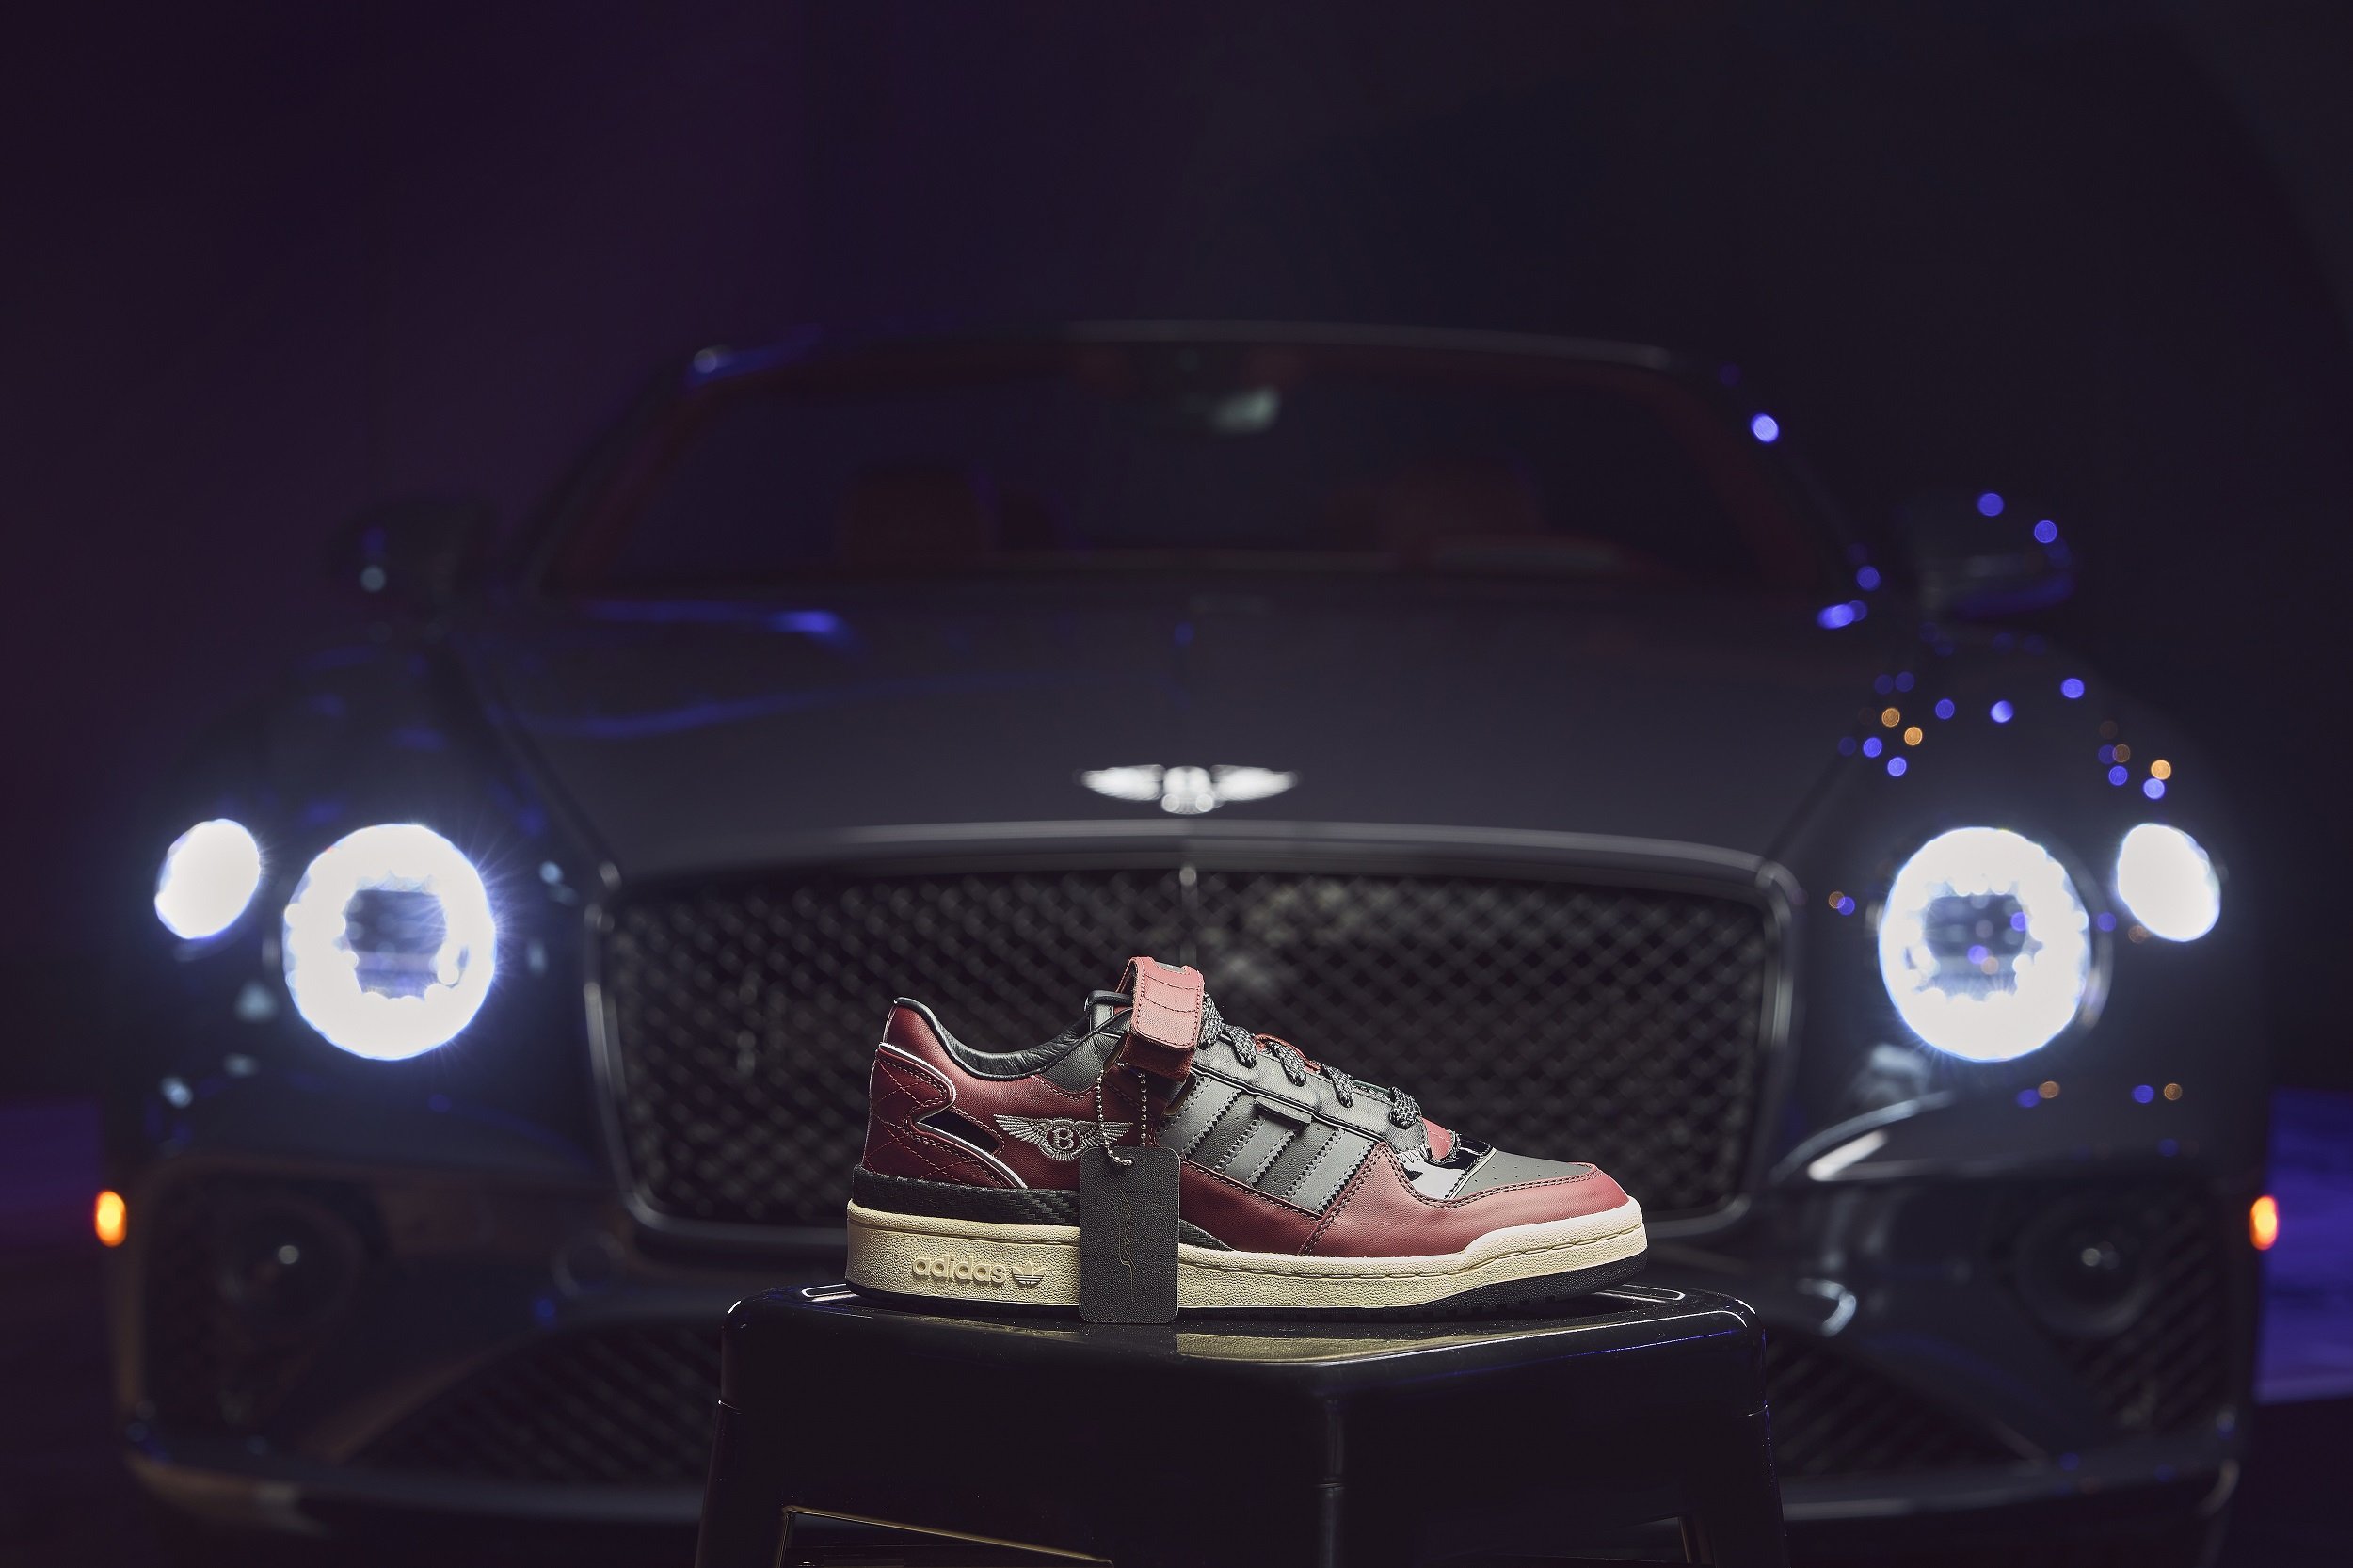 ‘The Surgeon’ Unveils Bespoke Limited Edition Bentley Sneakers